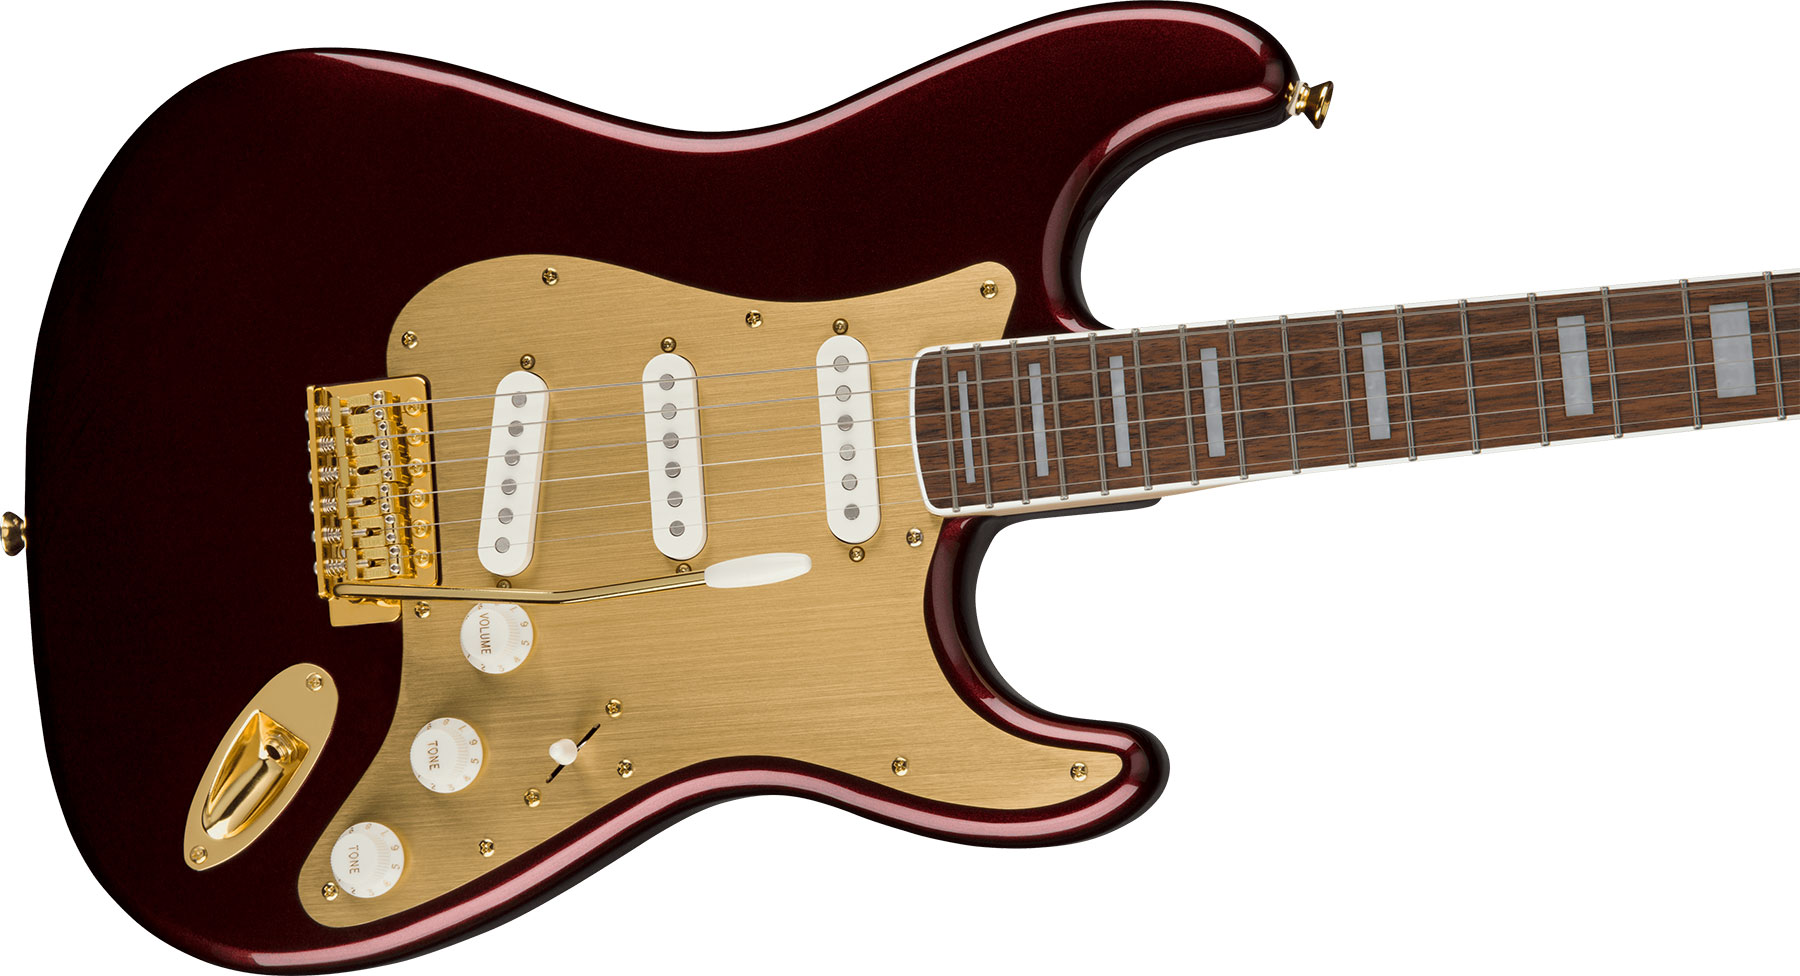 Squier Strat 40th Anniversary Gold Edition Lau - Ruby Red Metallic - Str shape electric guitar - Variation 2